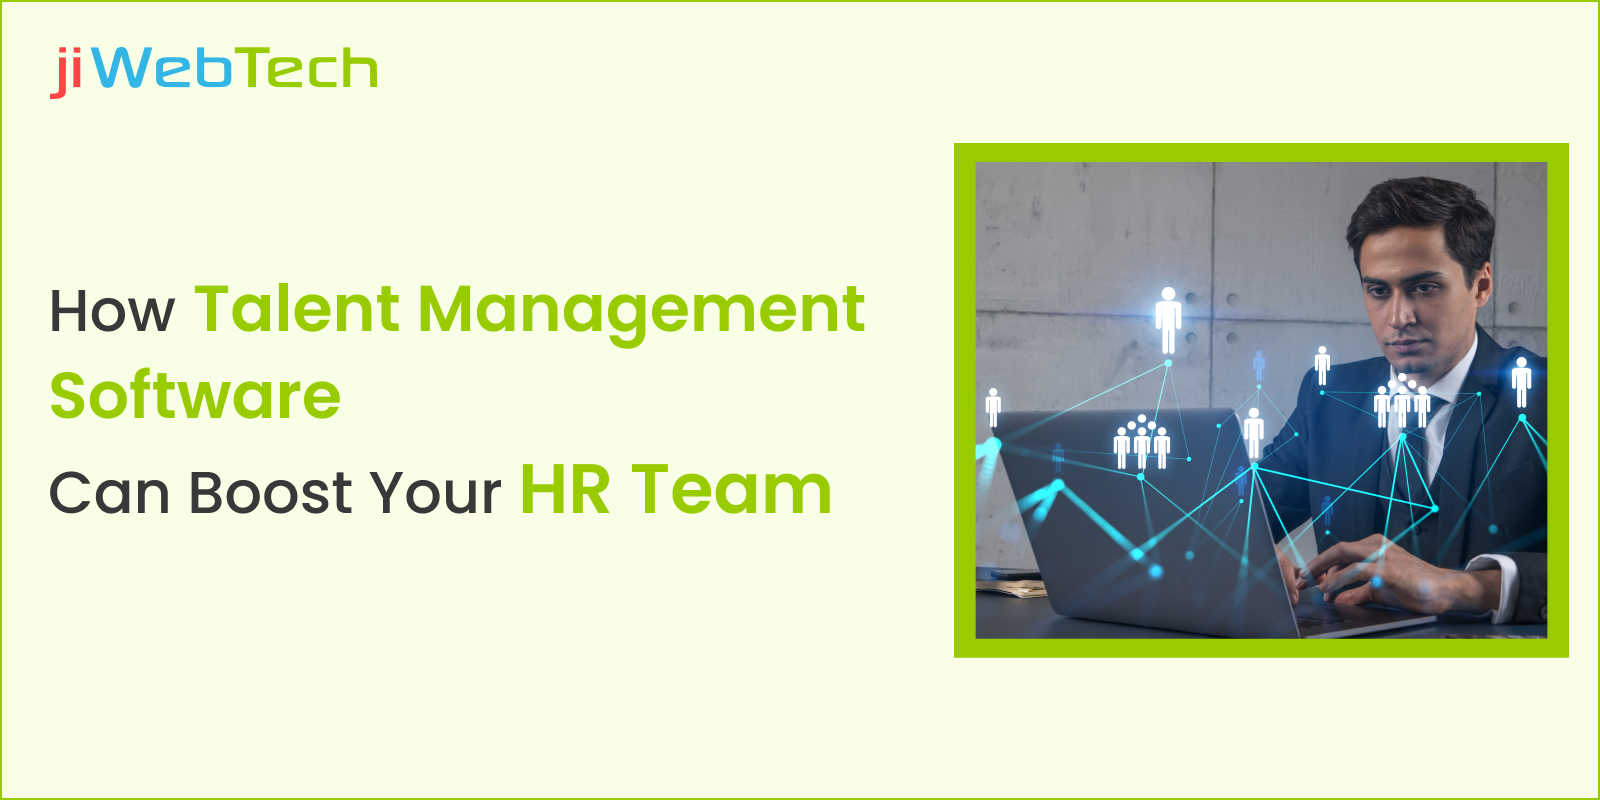 How Talent Management Software Can Boost Your HR Team